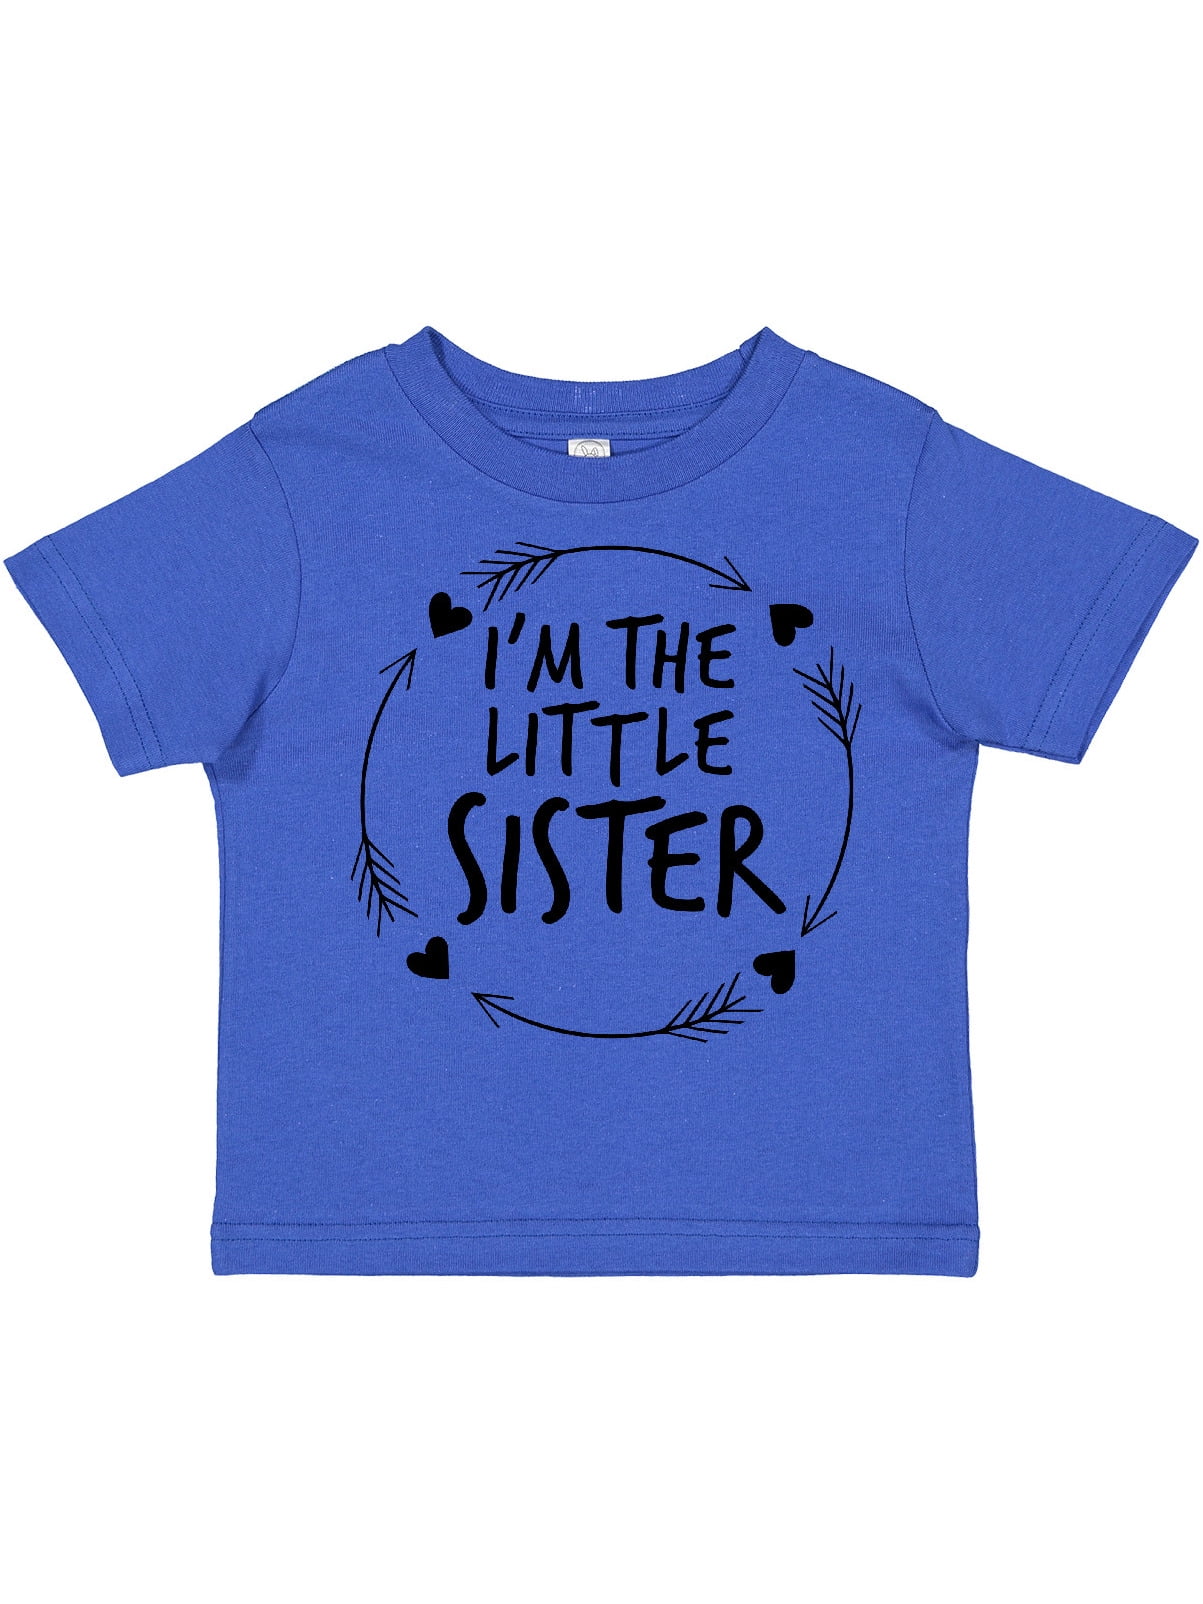 Little Sister T-Shirt "I'm the Little Sister" Girl Tee Love Gift Clothes Present 